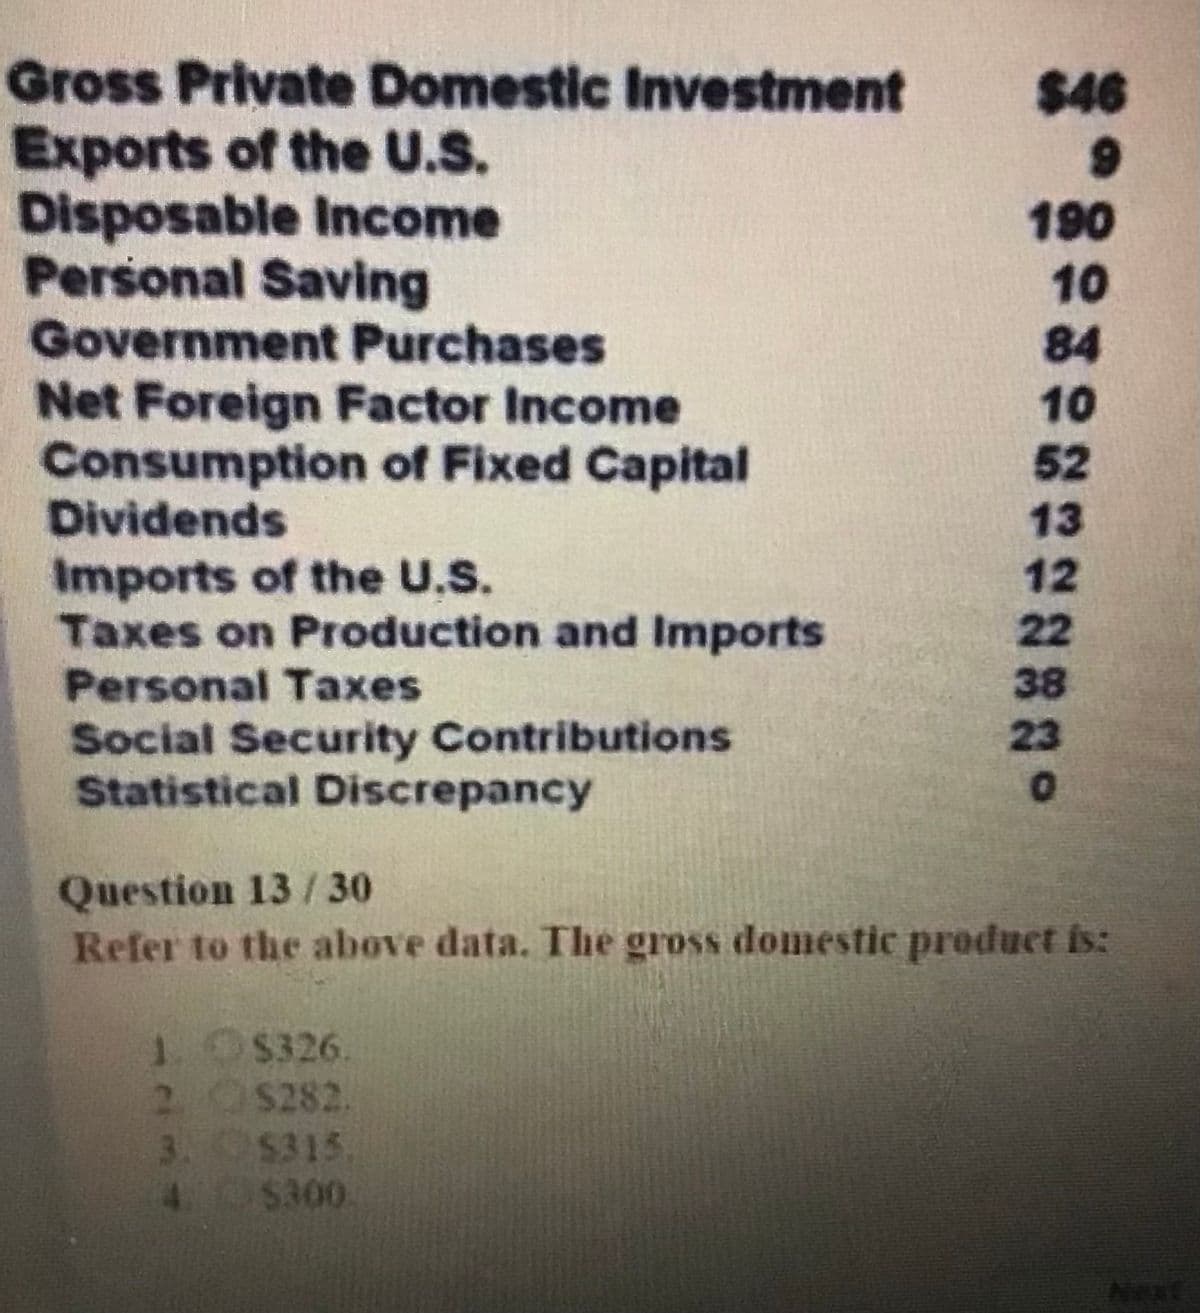 Gross Private Domestic Investment
$46
Exports of the U.S.
Disposable Income
Personal Saving
190
10
Government Purchases
84
Net Foreign Factor Income
Consumption of Fixed Capital
Dividends
10
52
13
Imports of the U.S.
Taxes on Production and Imports
Personal Taxes
12
22
38
23
Social Security Contributions
Statistical Discrepancy
Question 13/ 30
Refer to the above data. The gross domestic product fs:
1.
2 OS282.
3. $315
4.
1O$326.
$300
Next
